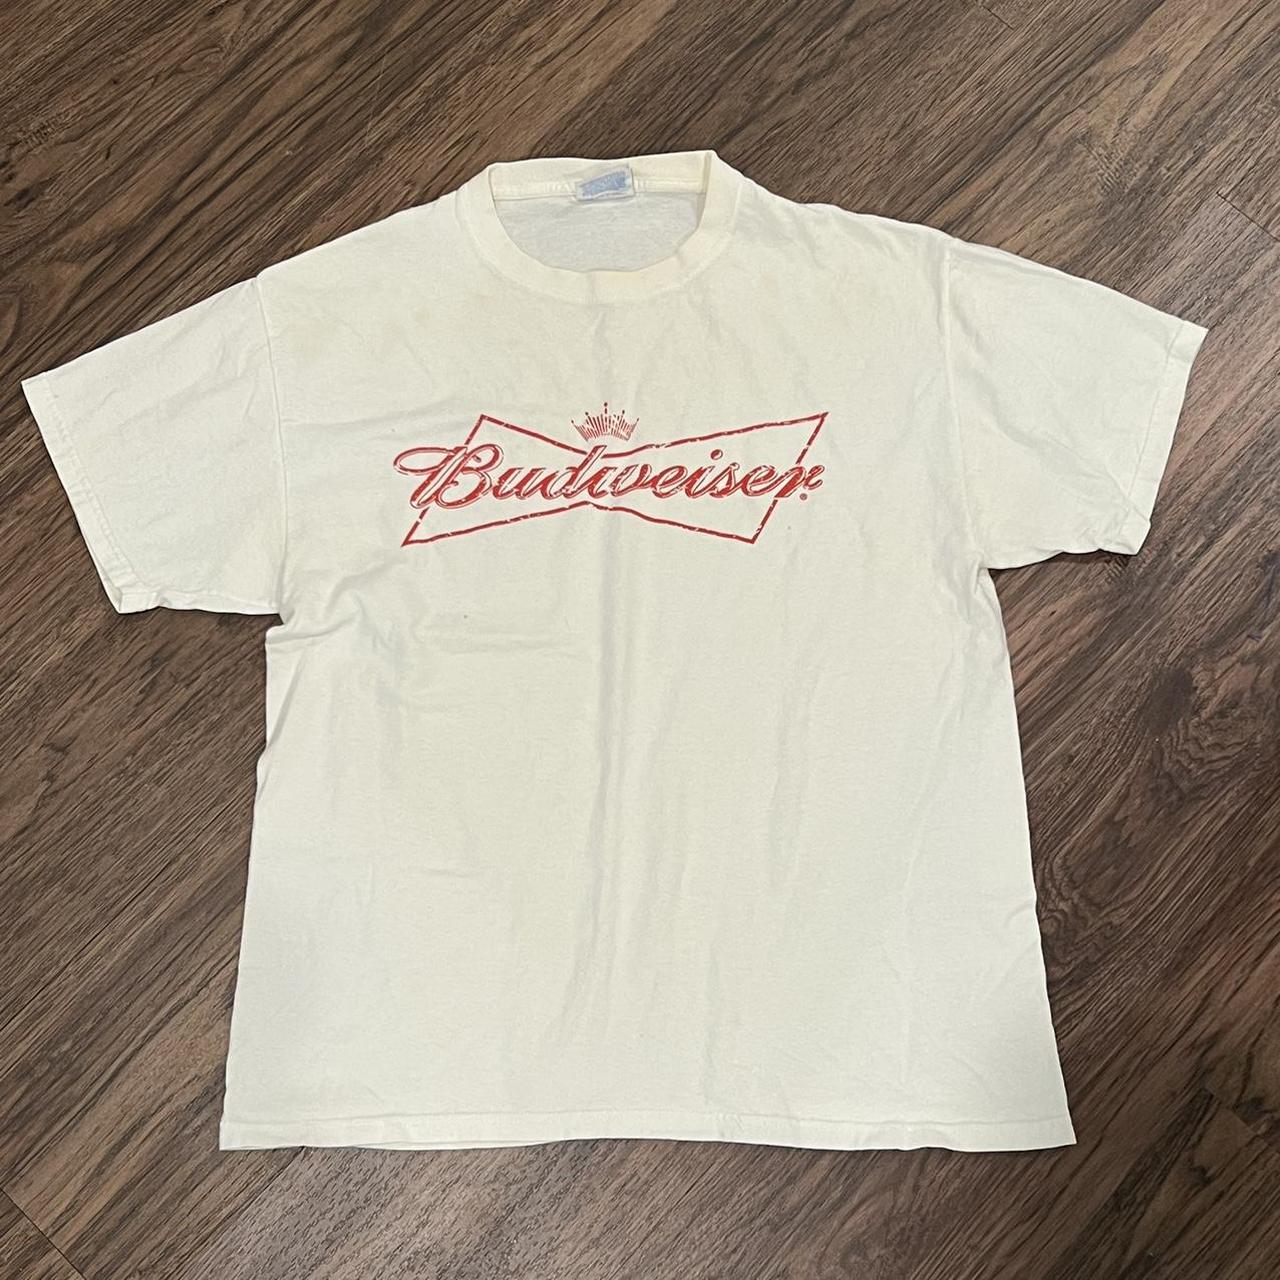 Budweiser Men's White and Red T-shirt